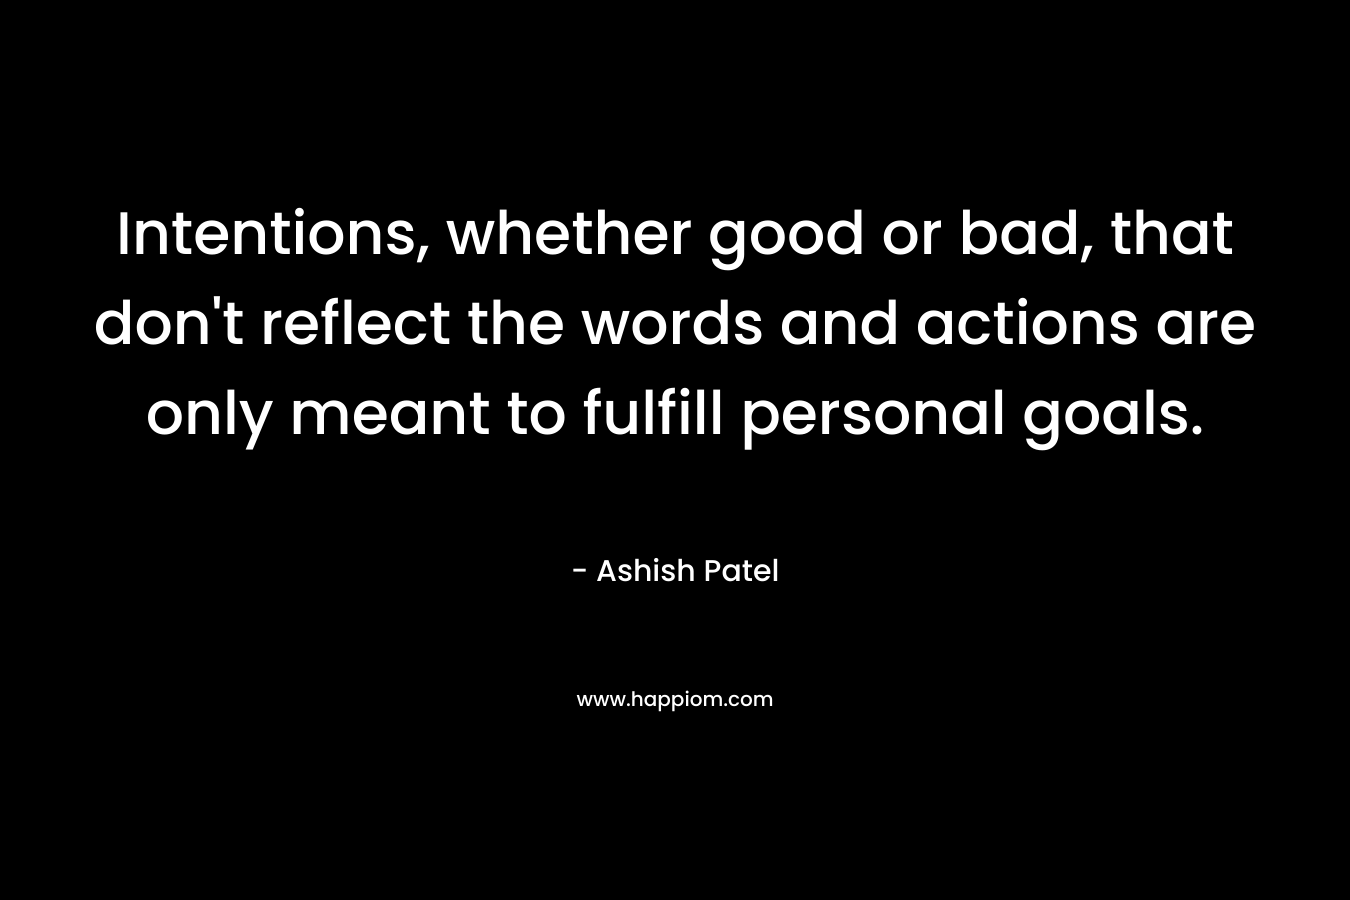 Intentions, whether good or bad, that don’t reflect the words and actions are only meant to fulfill personal goals. – Ashish Patel